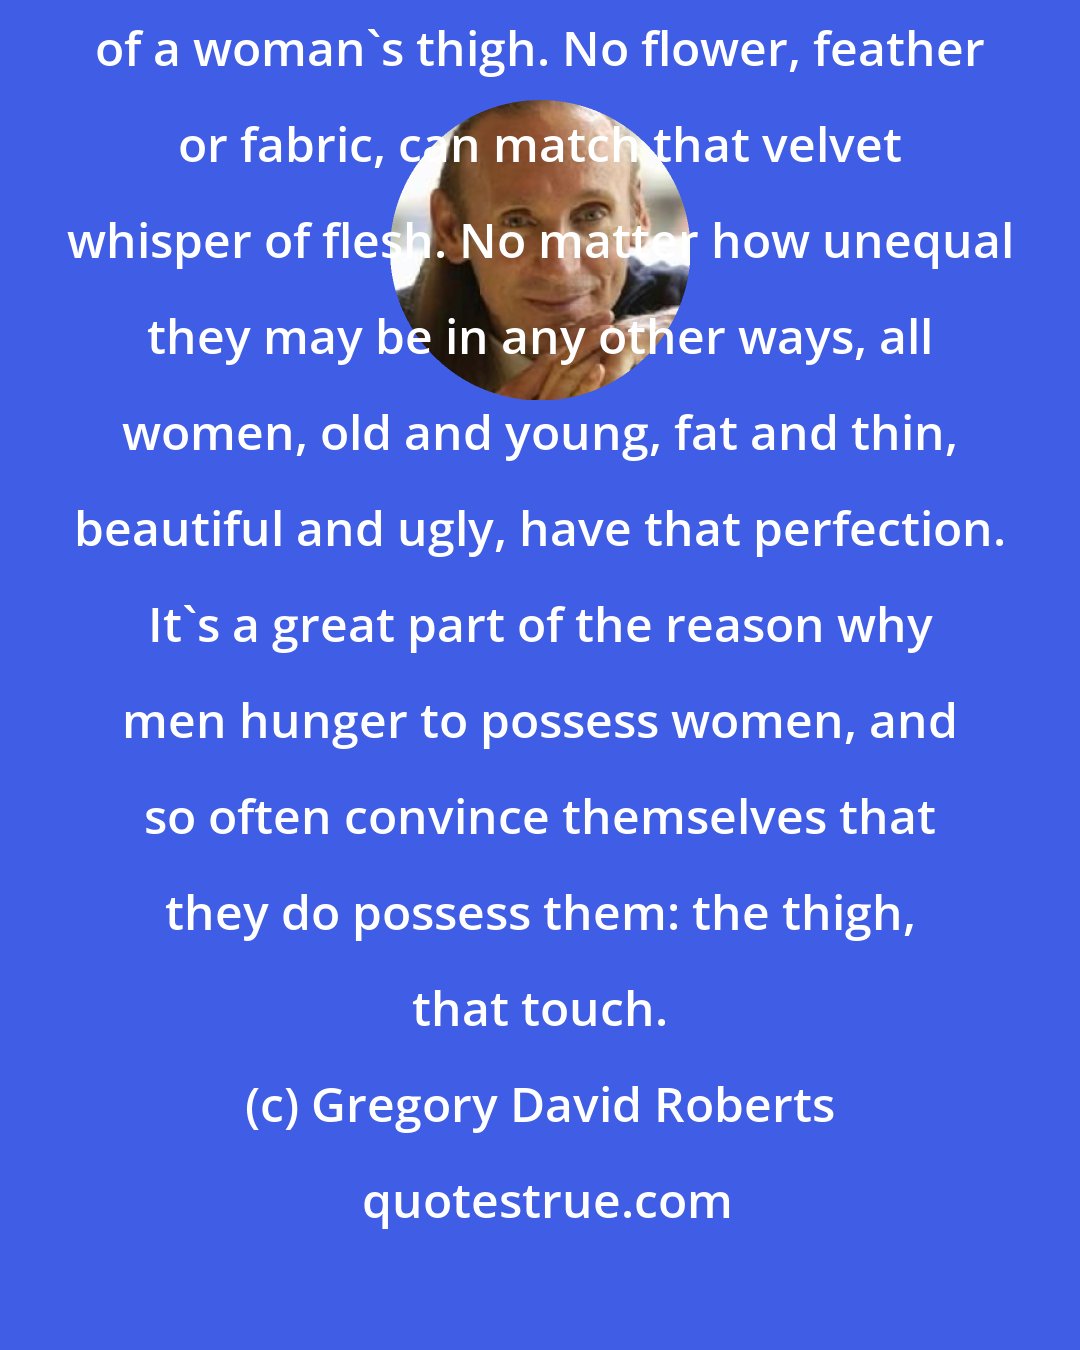 Gregory David Roberts: Nothing in the world is so soft and pleasing to the touch, as the skin of a woman's thigh. No flower, feather or fabric, can match that velvet whisper of flesh. No matter how unequal they may be in any other ways, all women, old and young, fat and thin, beautiful and ugly, have that perfection. It's a great part of the reason why men hunger to possess women, and so often convince themselves that they do possess them: the thigh, that touch.